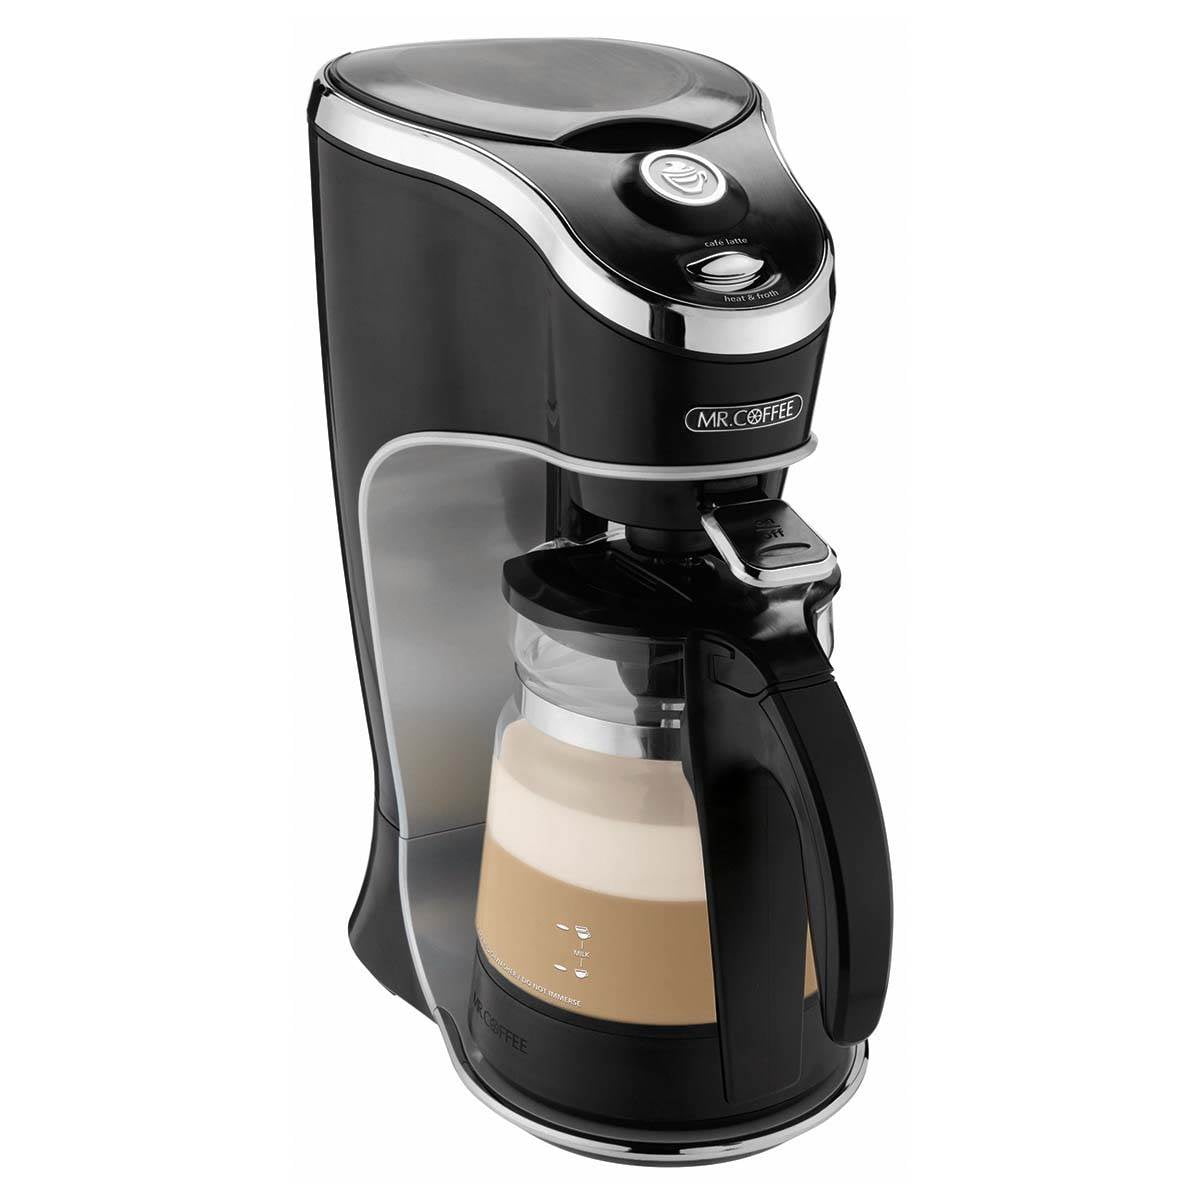 Mr. Coffee® Iced Coffee Maker - Lavender, 1 ct - Fry's Food Stores